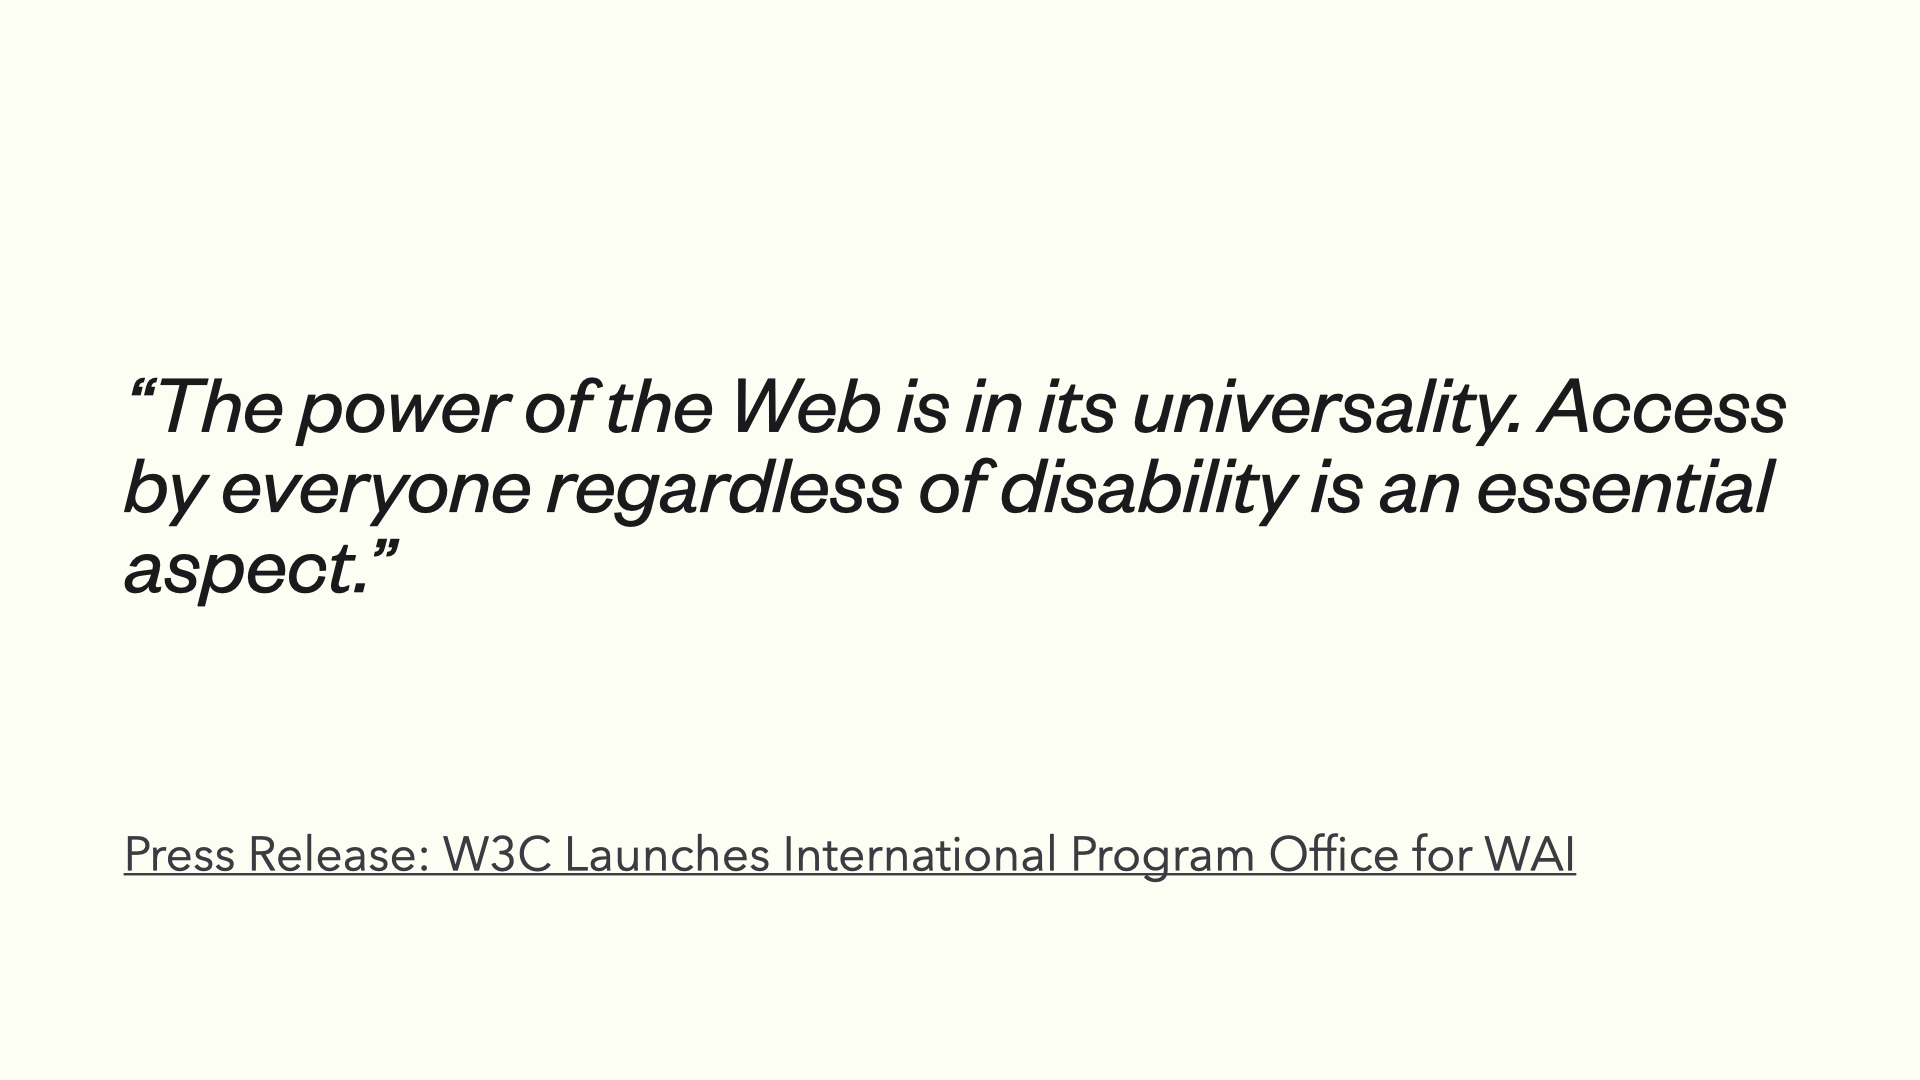 Press Release: W3C Launches International Program Office for WAI より引用「The power of the Web is in its universality. Access by everyone regardless of disability is an essential aspect.」